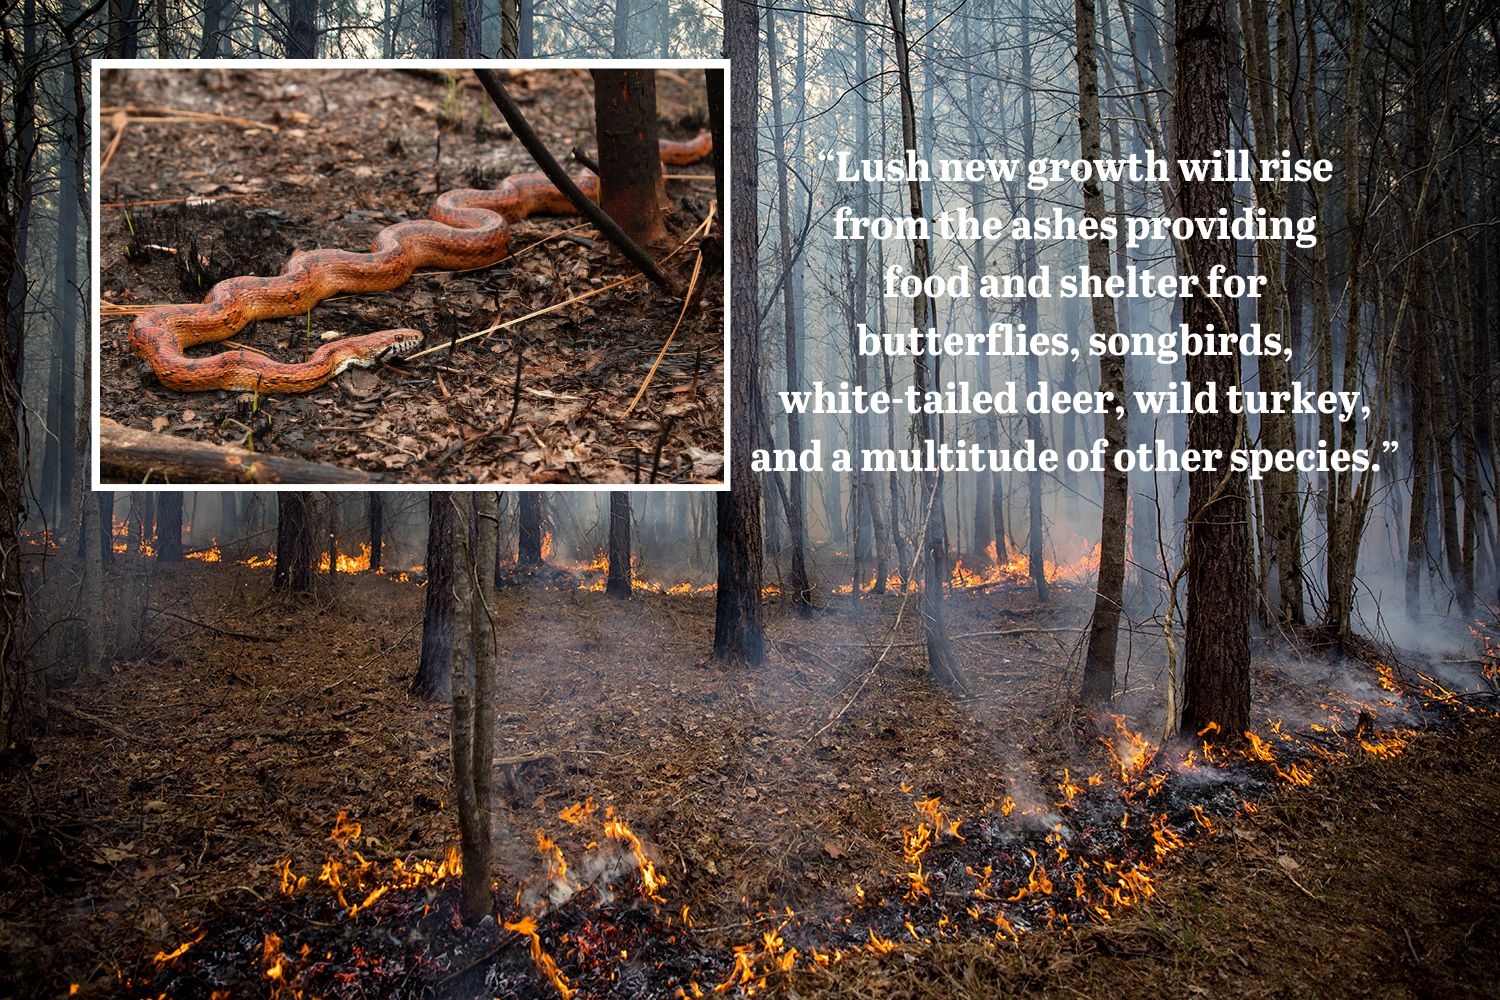 An image of a forest on fire with the quote "lush new growth will rise from the ashes providing food and shelter for butterflies, songbirds, white tailed deer, wild turkey and a multitude of other species"